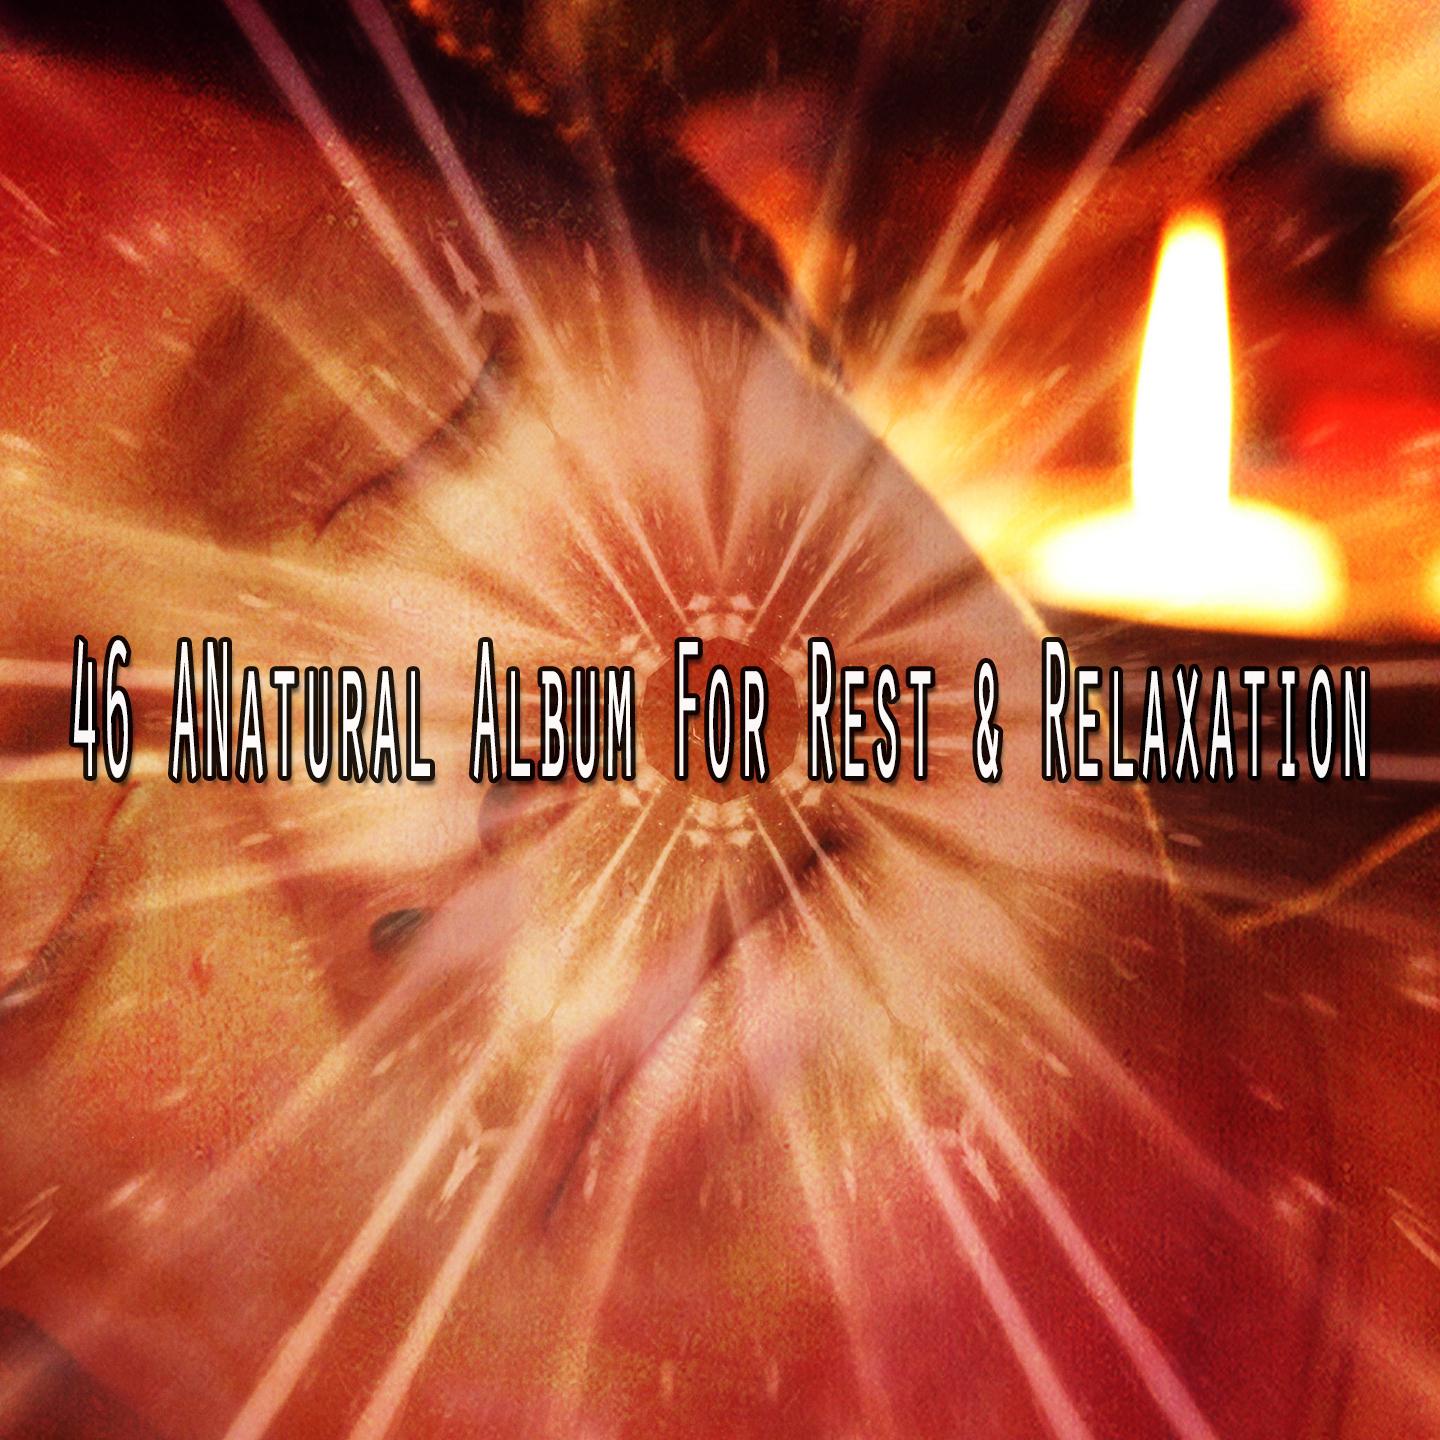 46 Anatural Album for Rest & Relaxation